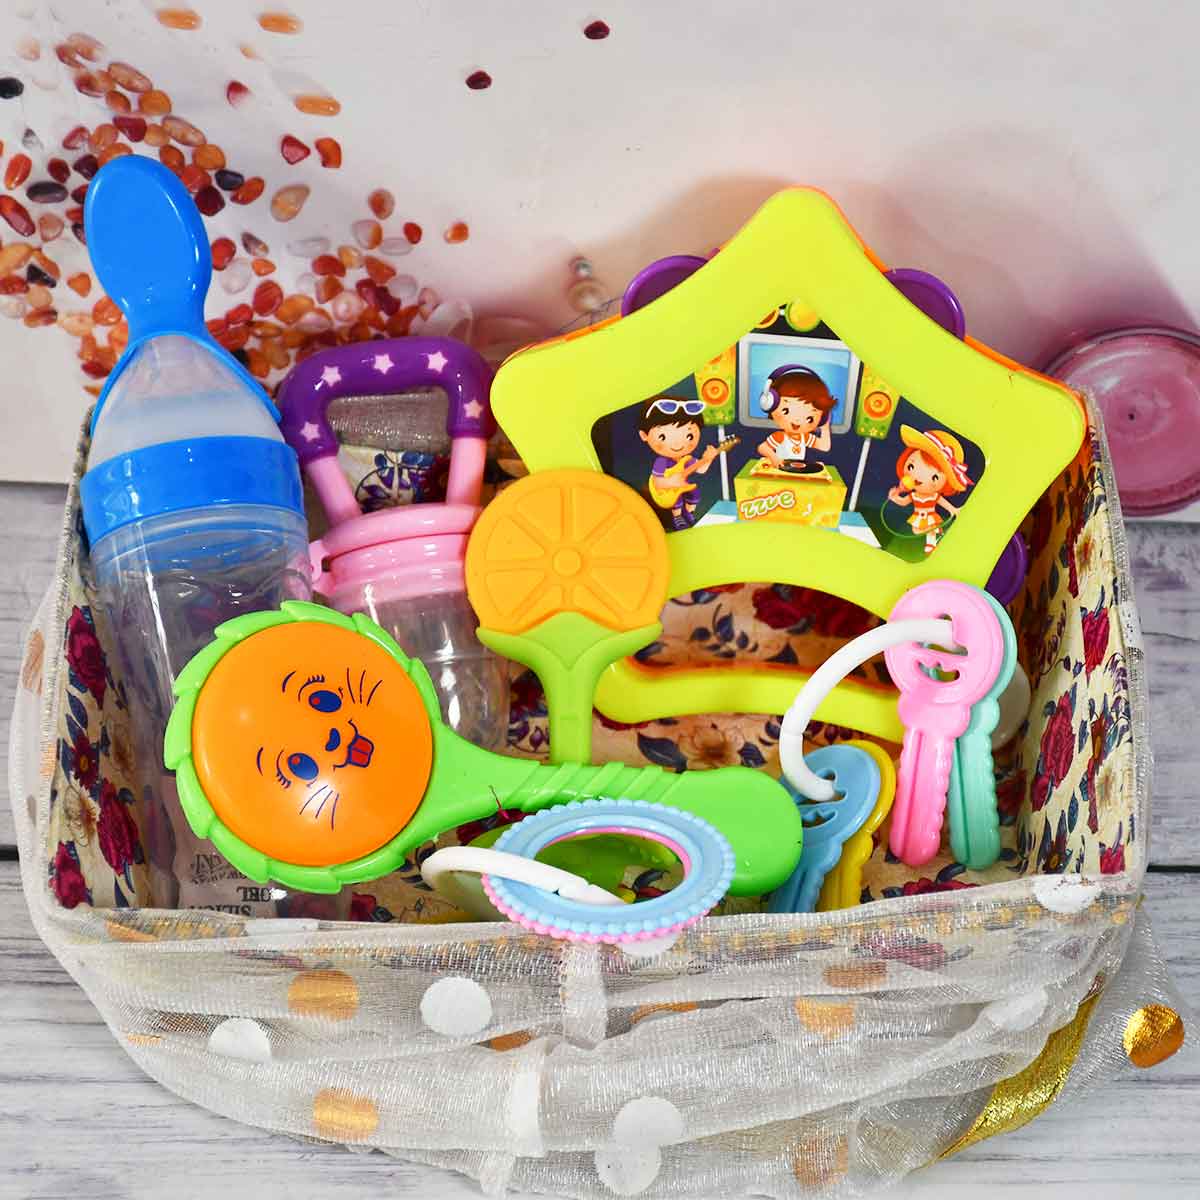 Baby Shower, Welcome Baby Gift Basket -   Cute baby shower gifts,  Newborn gift basket, Baby gift basket